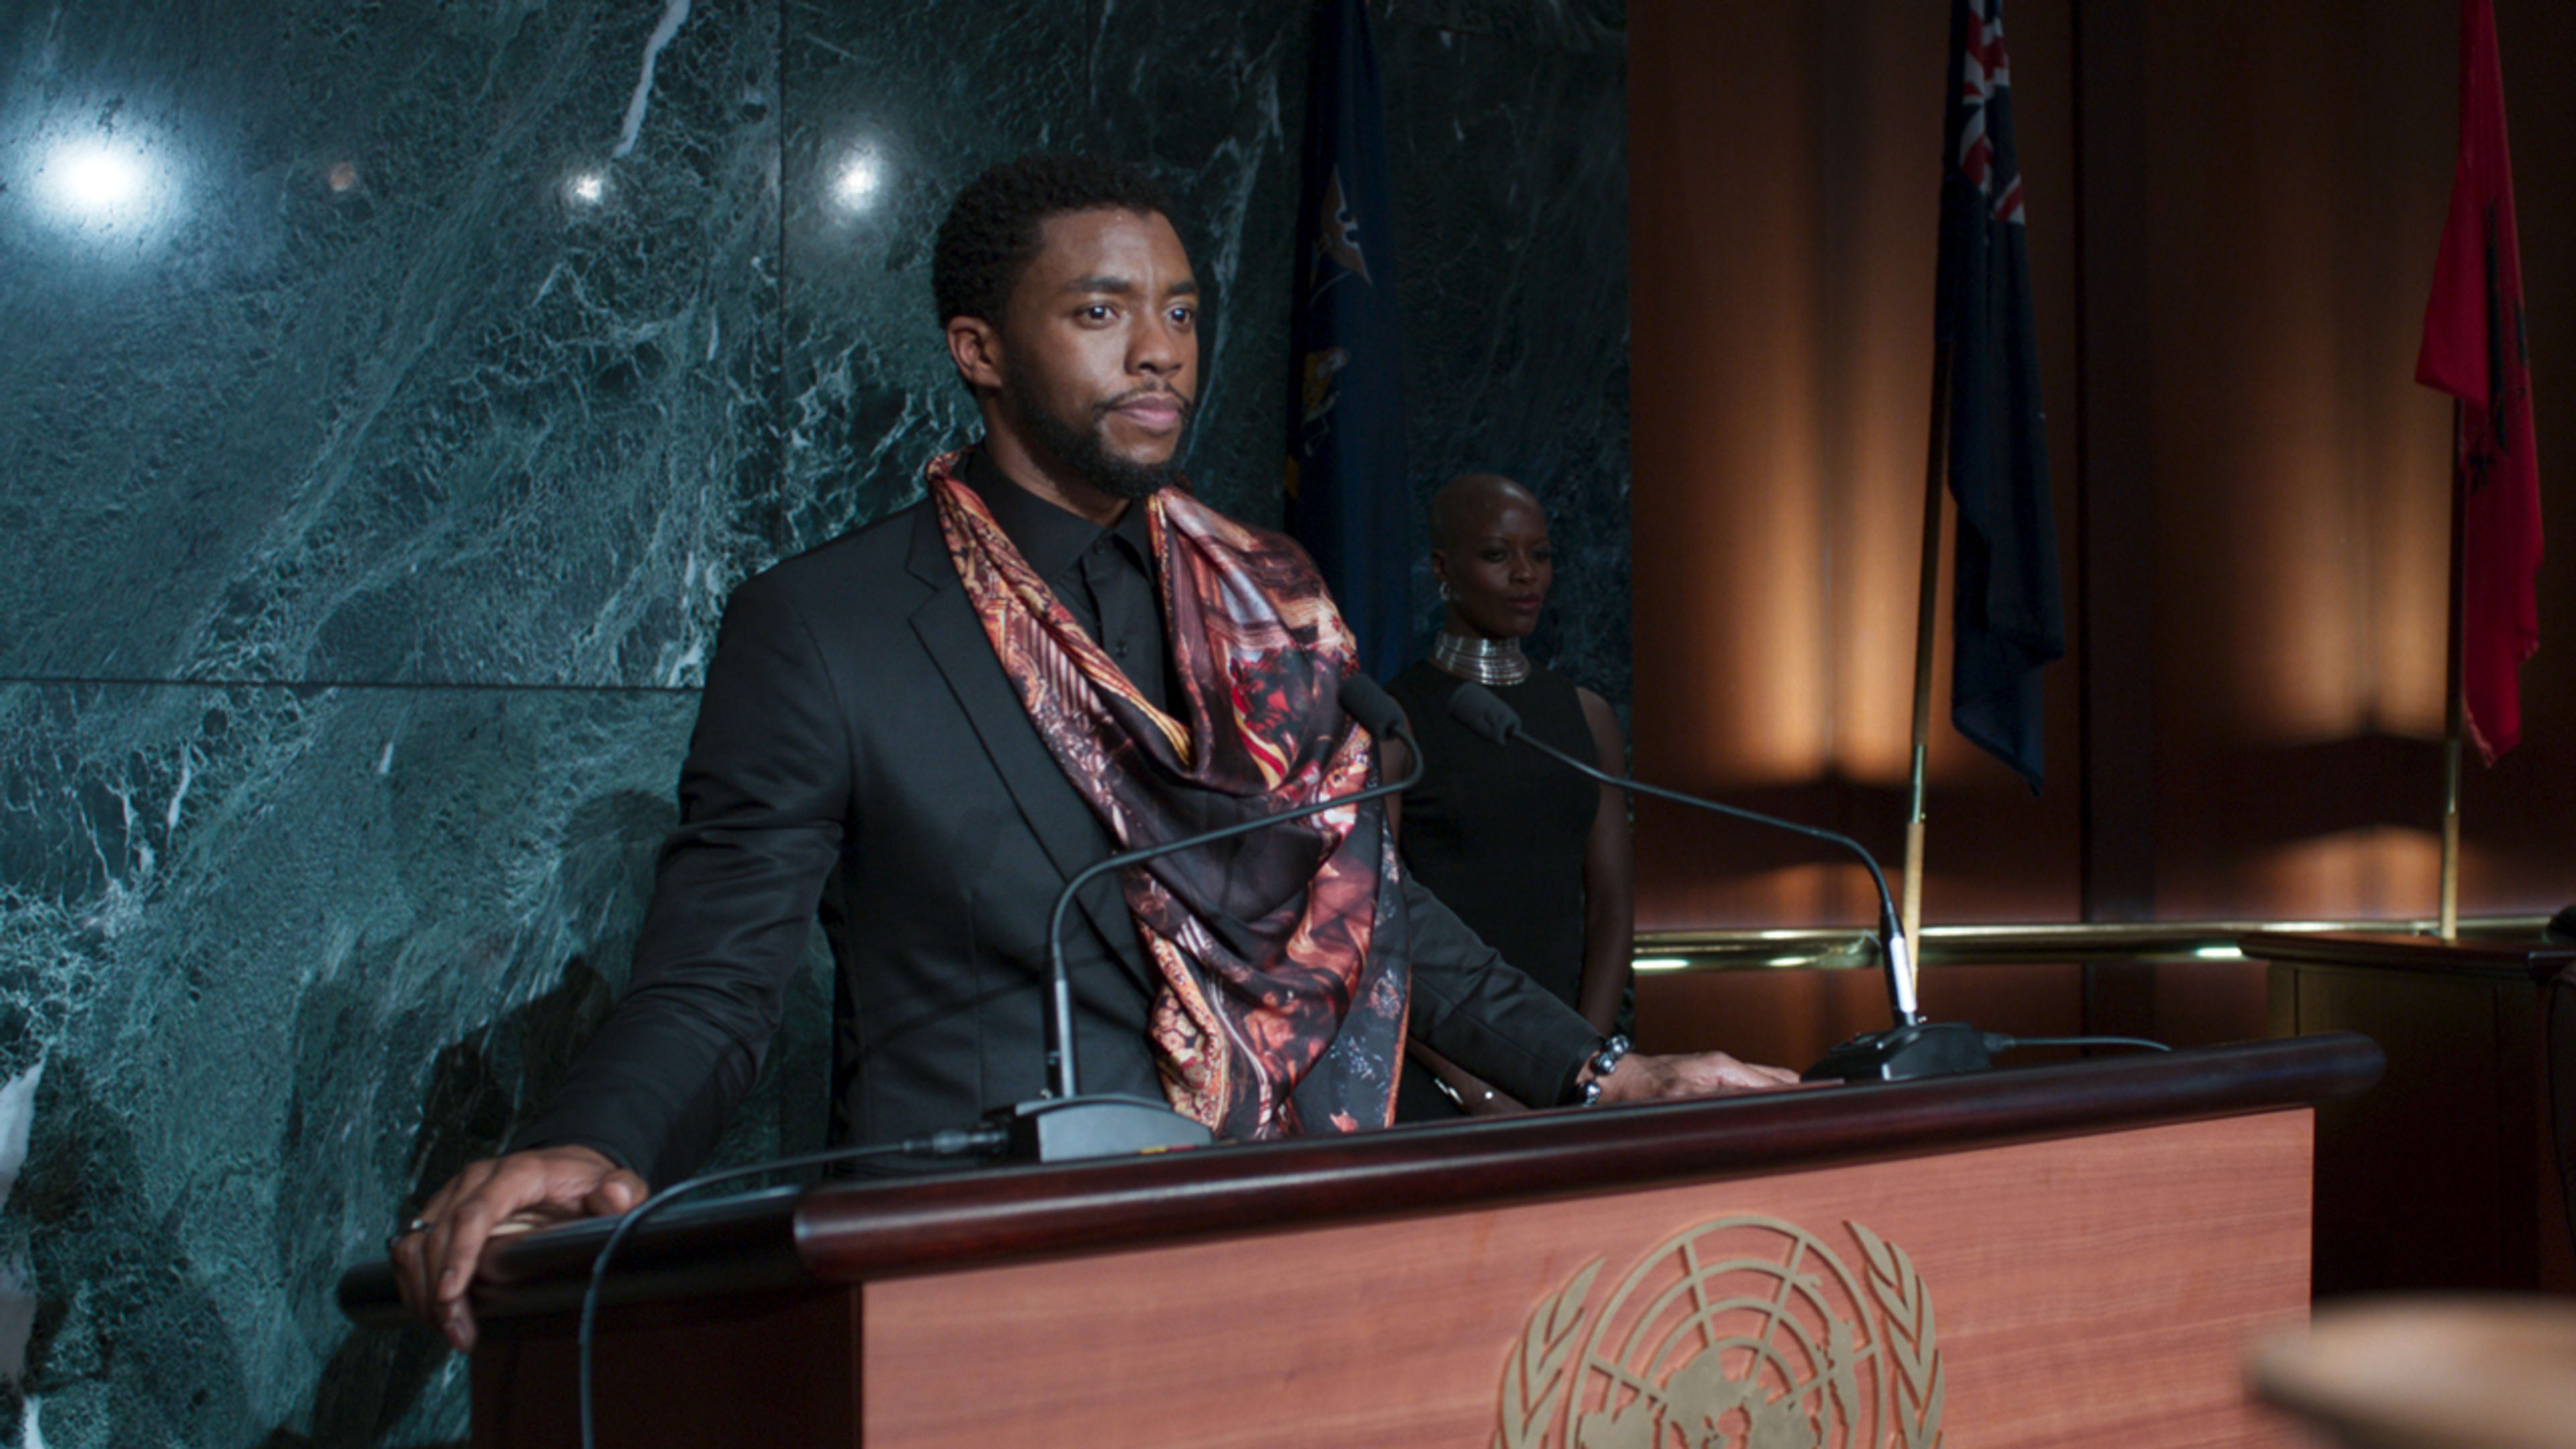 Why “Black Panther” should absolutely win Best Picture at the Oscars